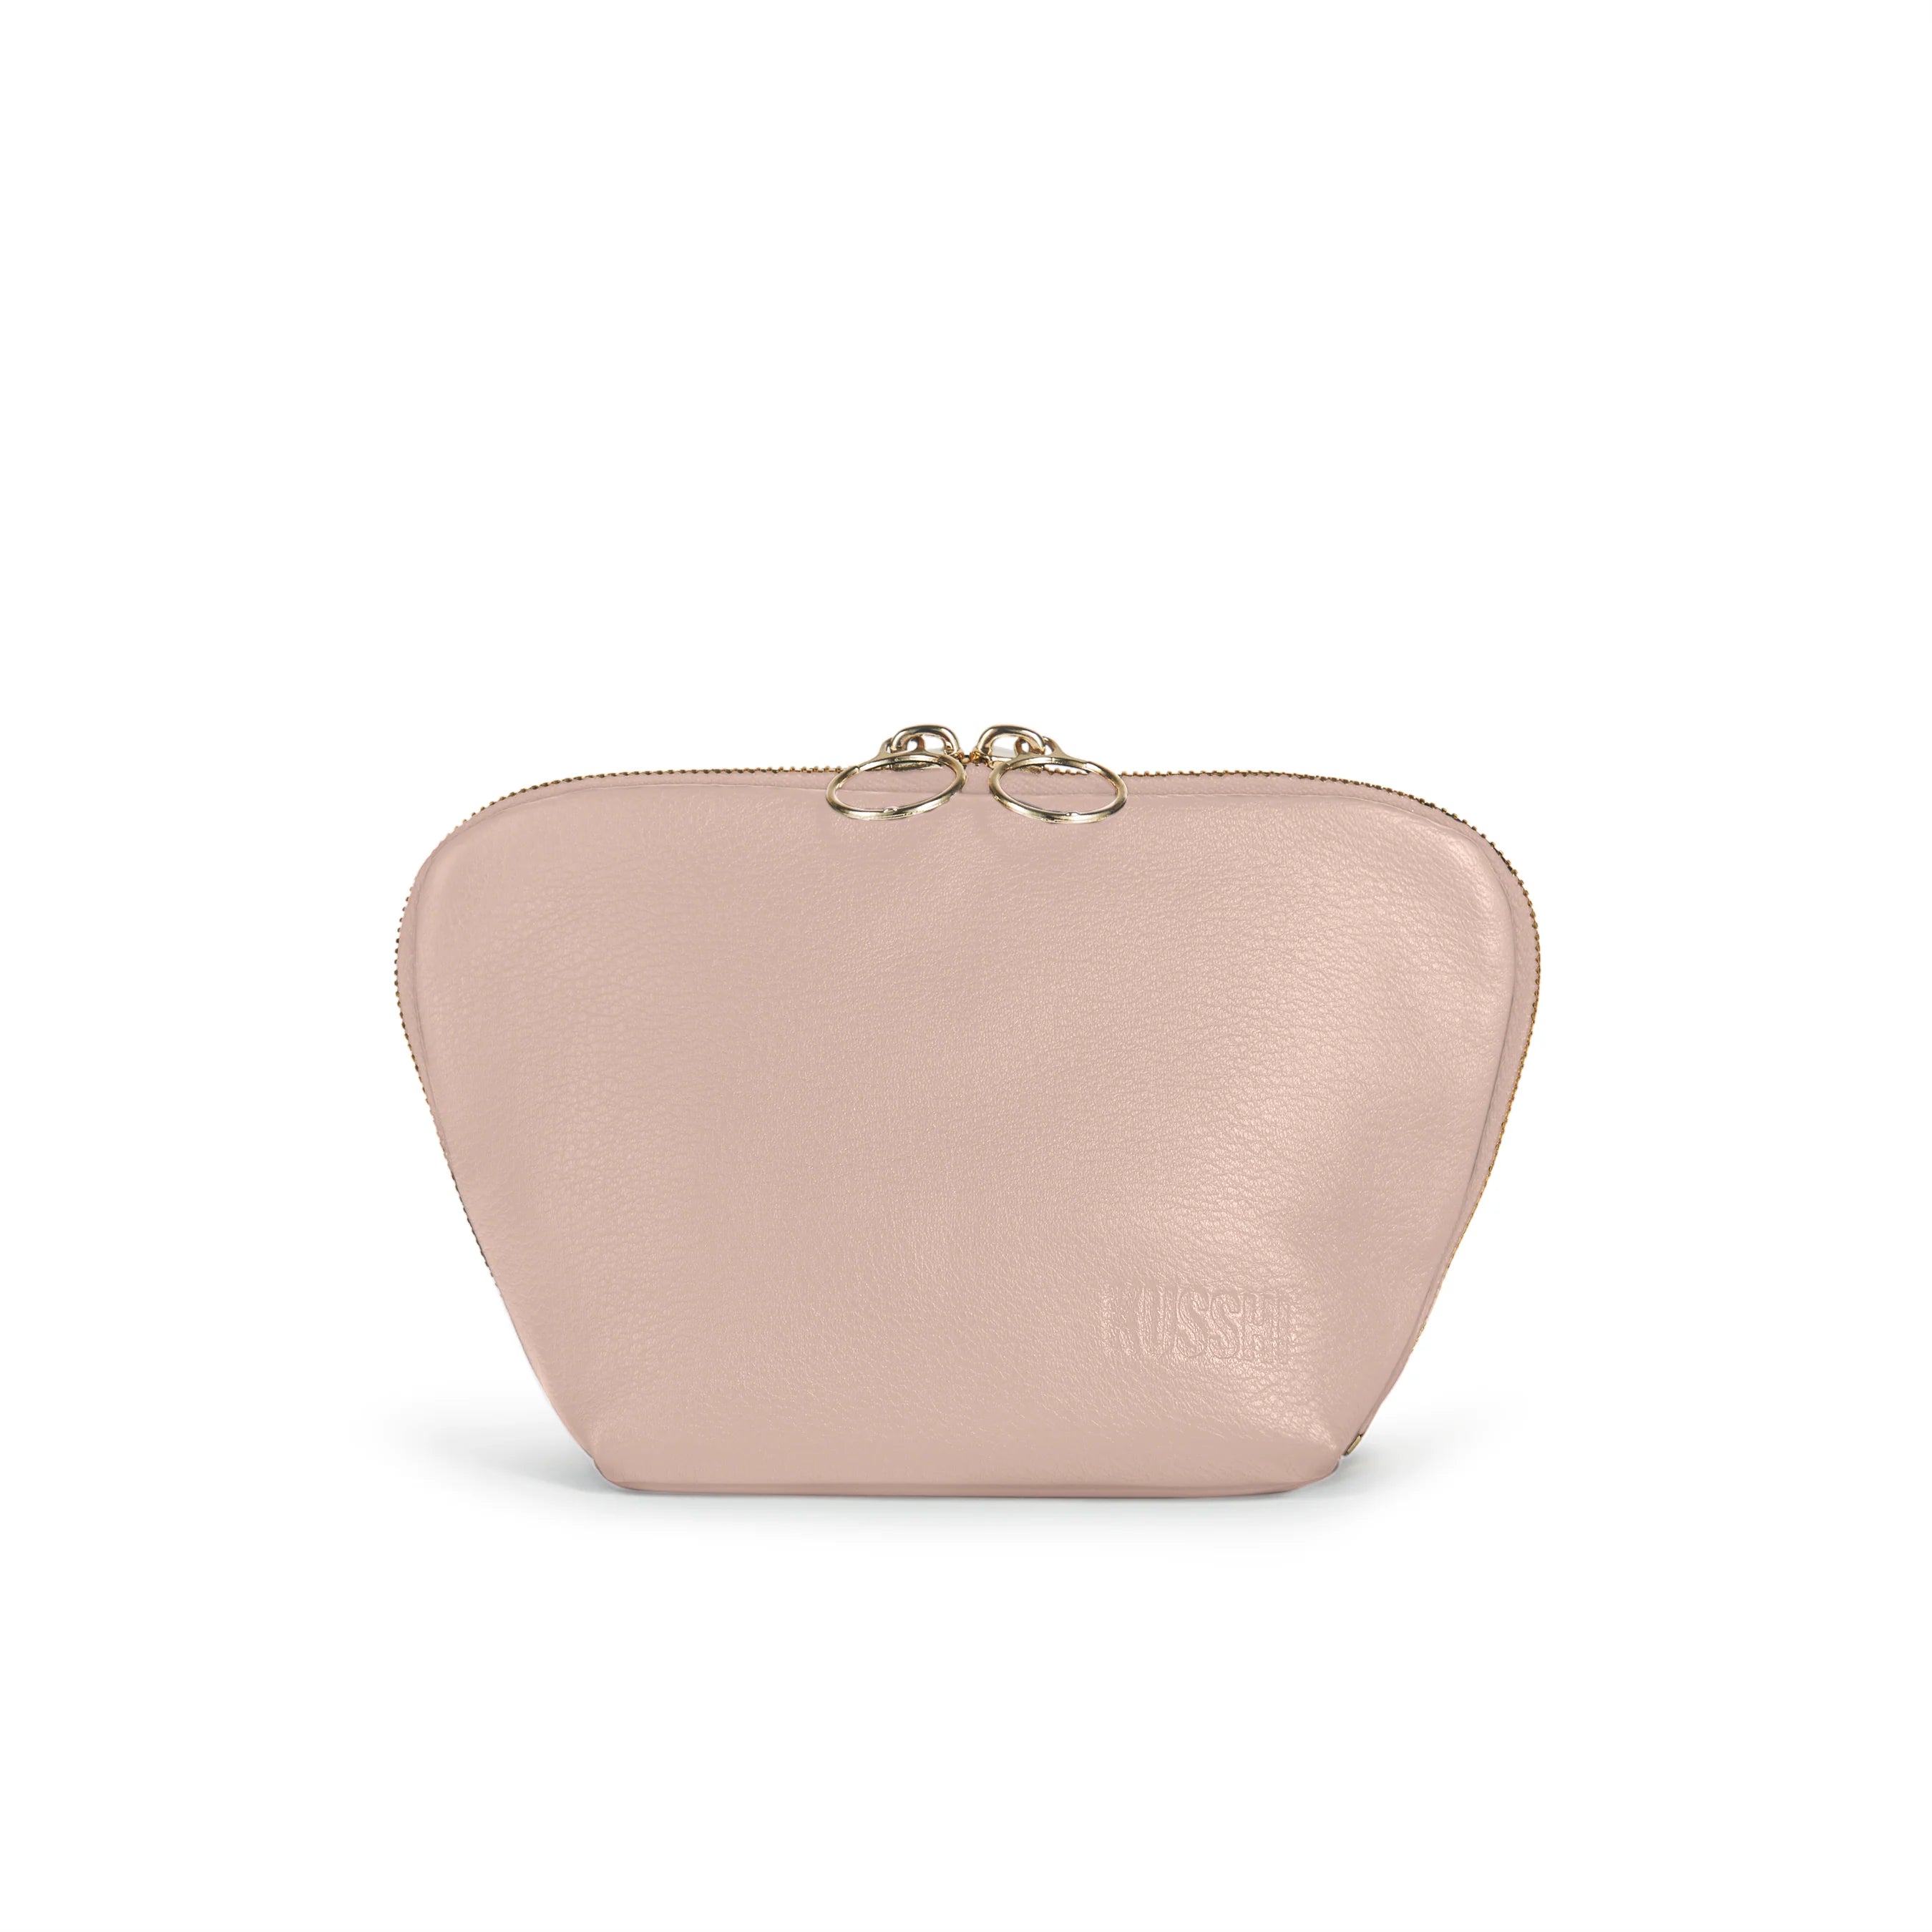 KUSSHI Everyday Makeup Bag Blush Pink Leather with Cool Grey Interior